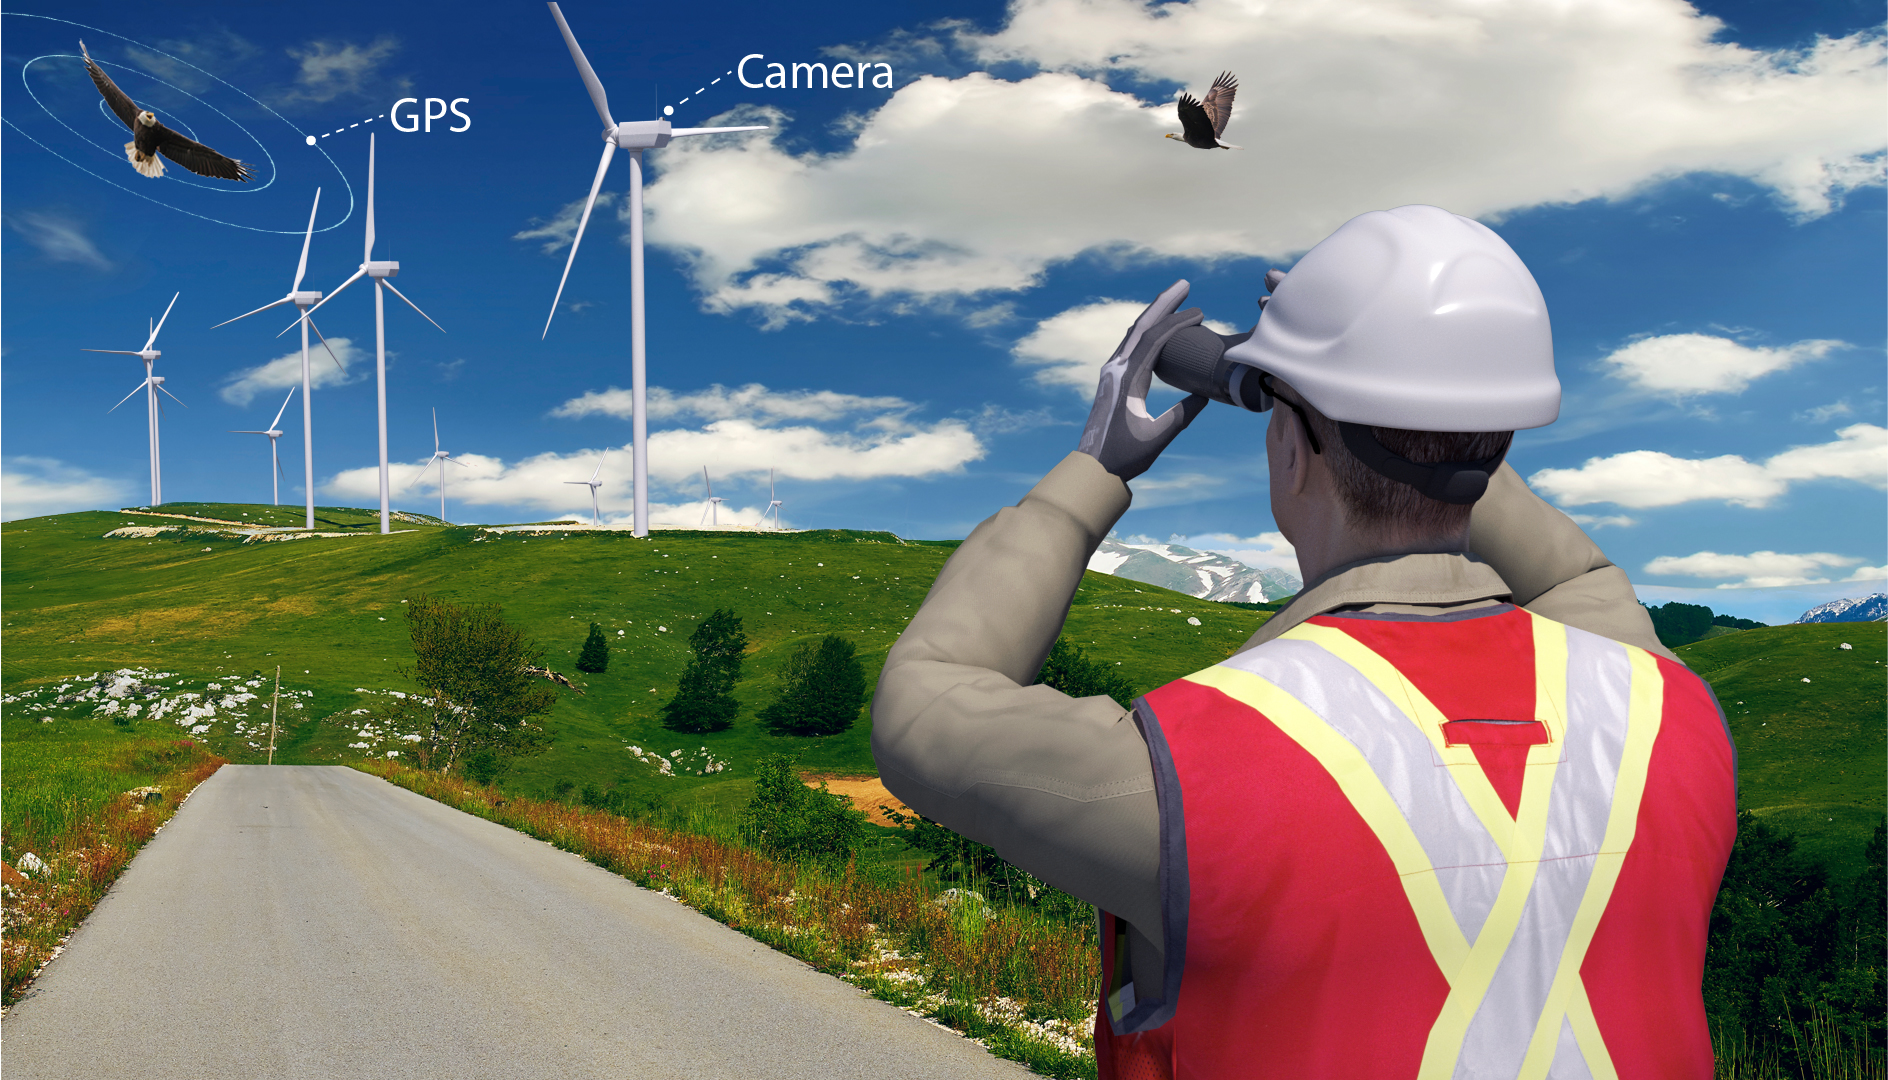 A computer graphic of a person standing on a road in between grassy hills wearing personal protective equipment and using binoculars to look at eagles labeled with the word “GPS” with wind turbines in the background labeled with the word “Camera”.